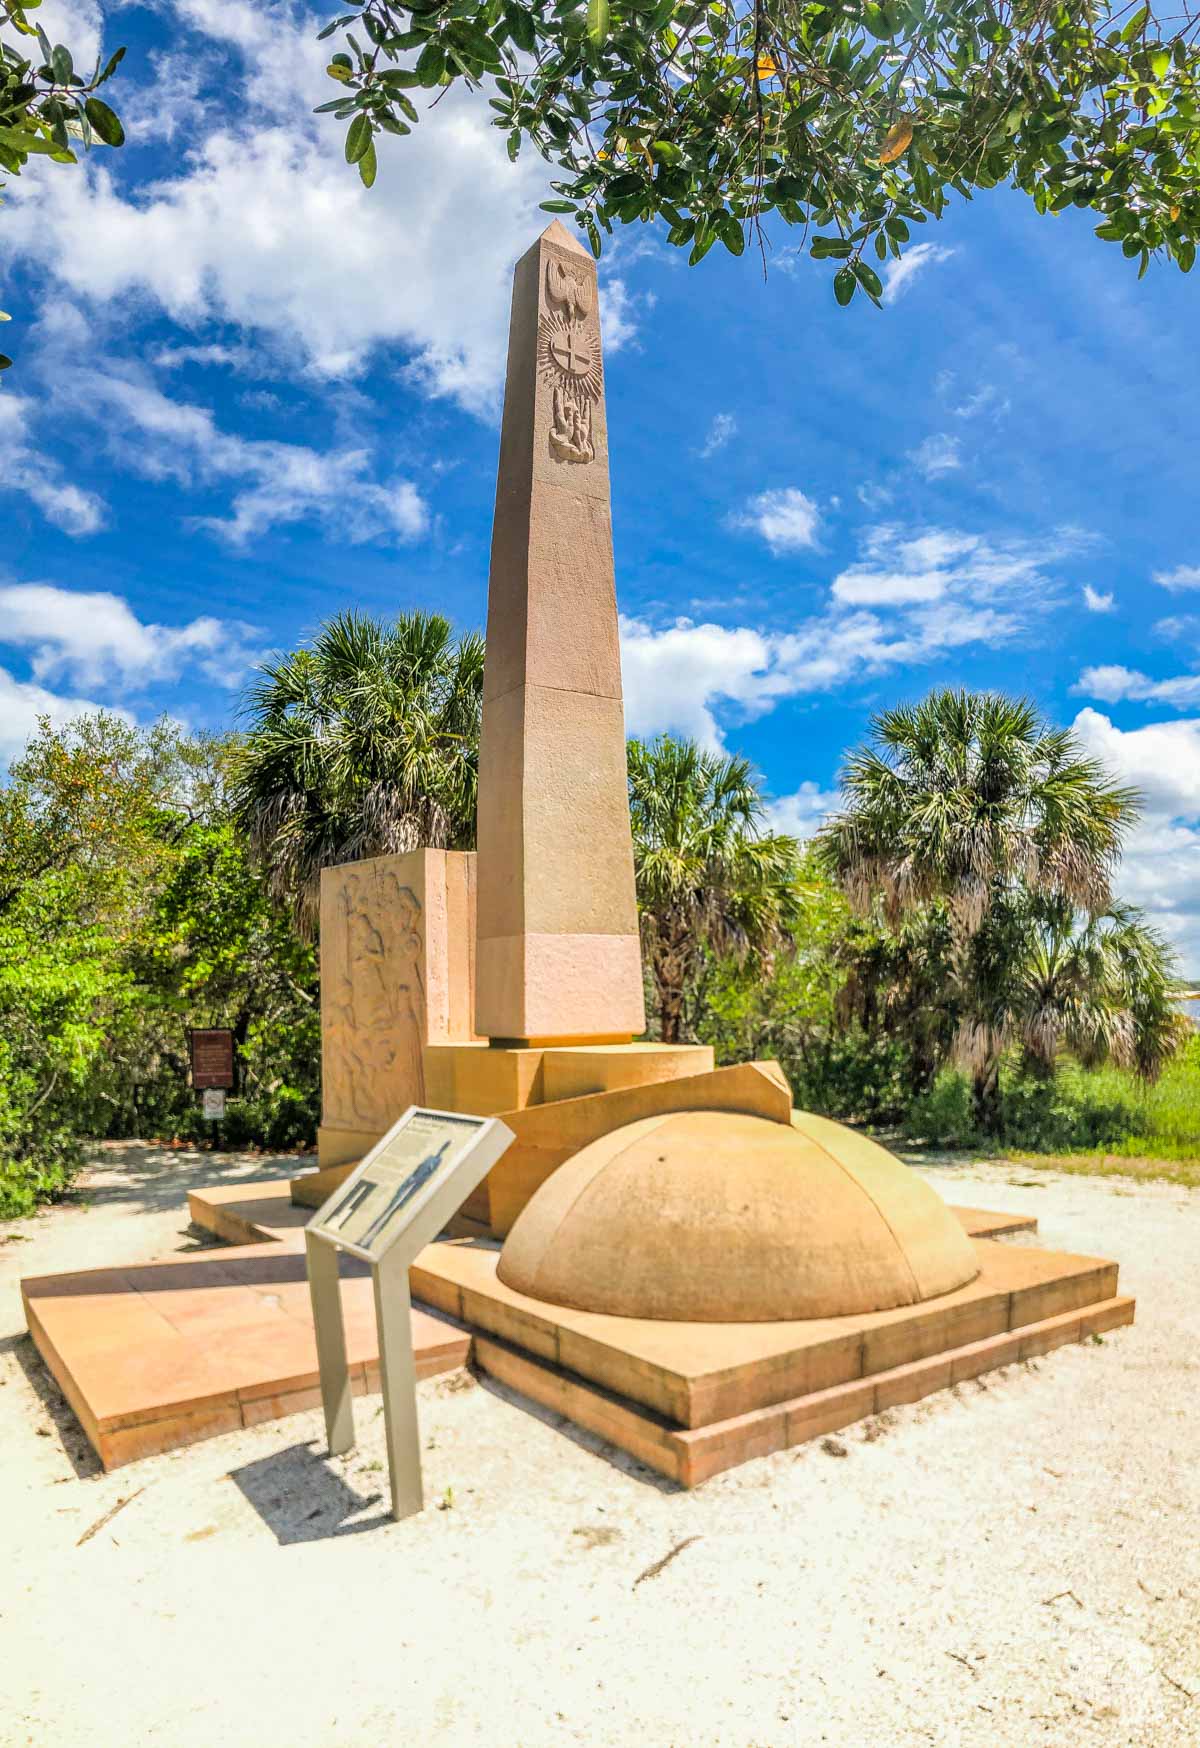 A picture of a monument in Desoto National Memorial using Panorama Mode to capture more of the view.